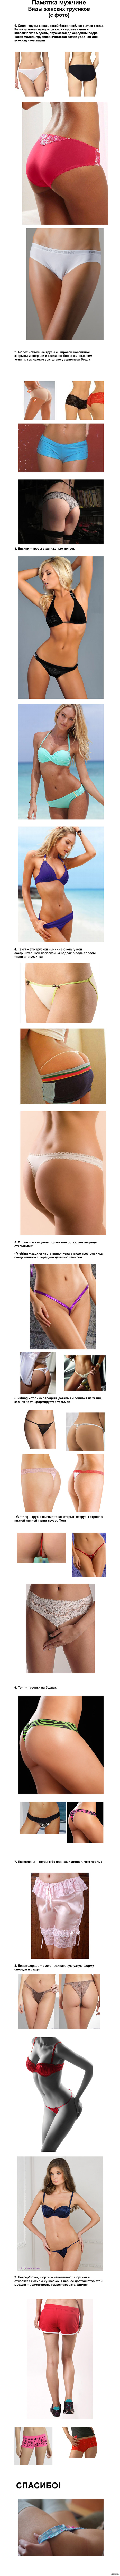 Types of women's panties (LONG POST) - NSFW, Underpants, , The photo